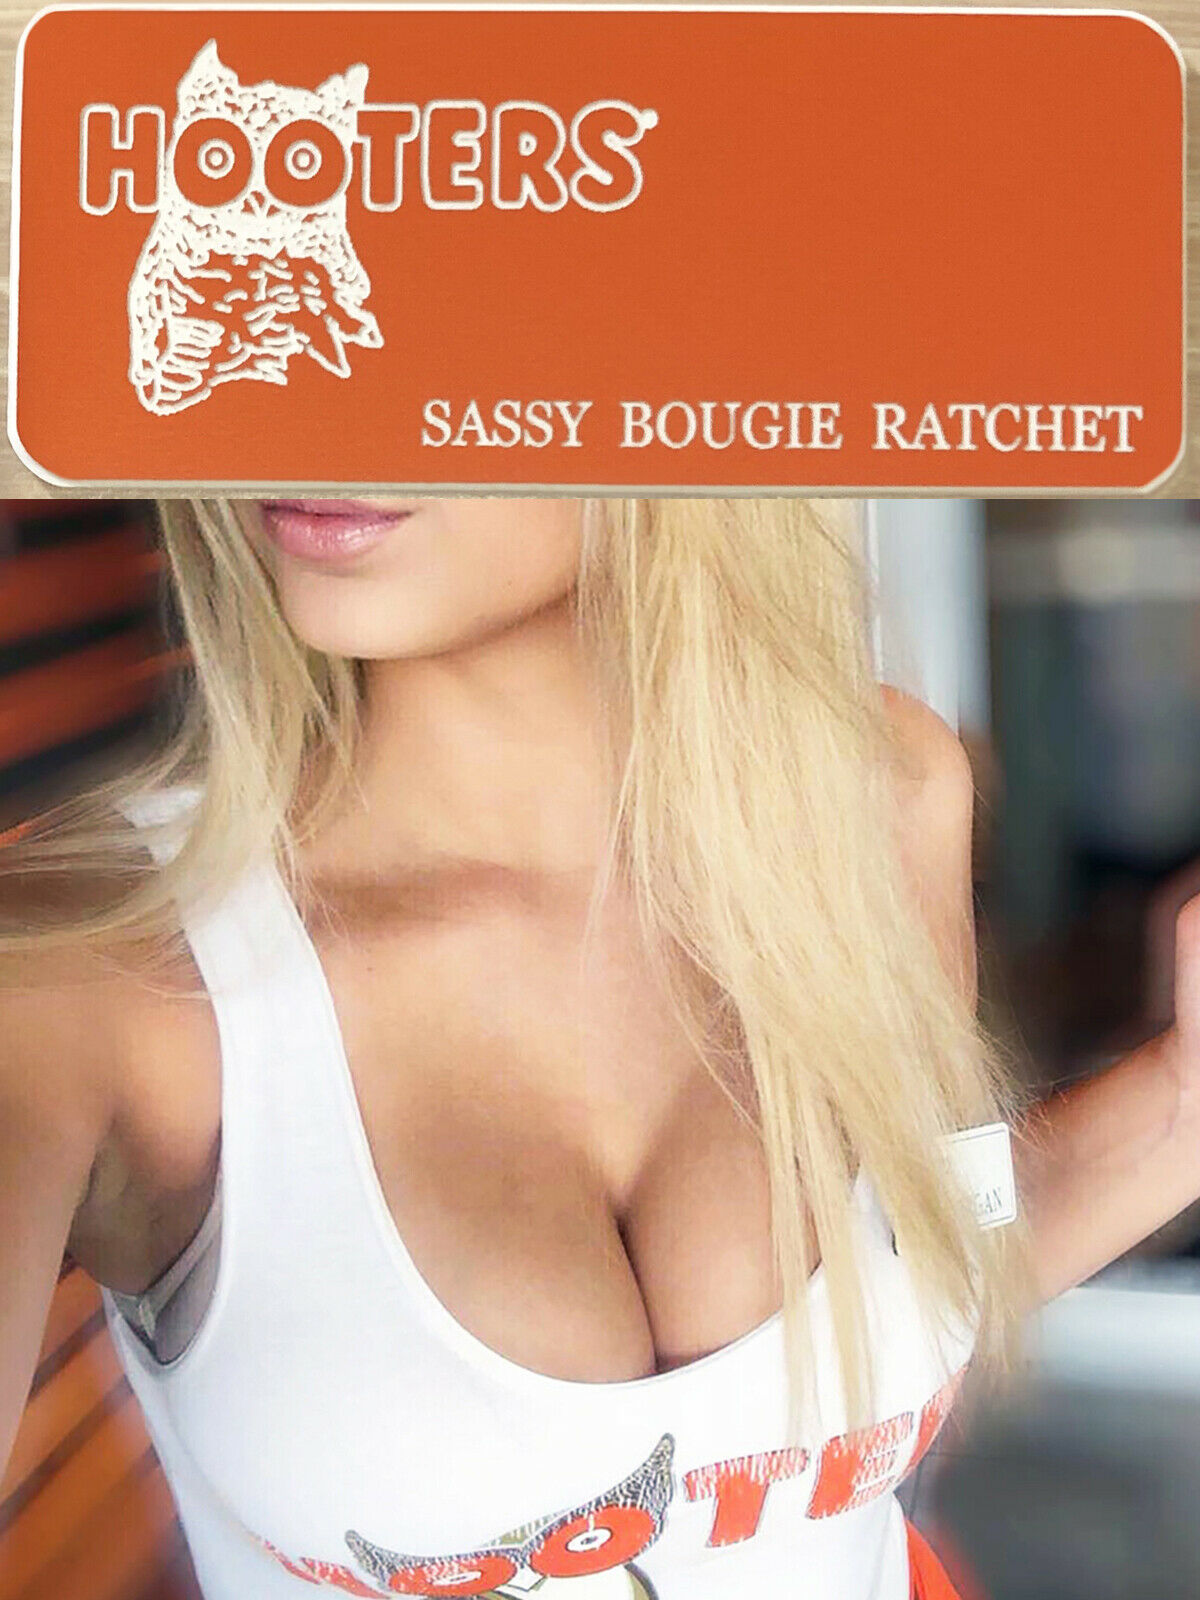 HOOTERS Pin Engrave Personalize Customize YOUR NAME TAG SASSY BOUGIE RATCHET